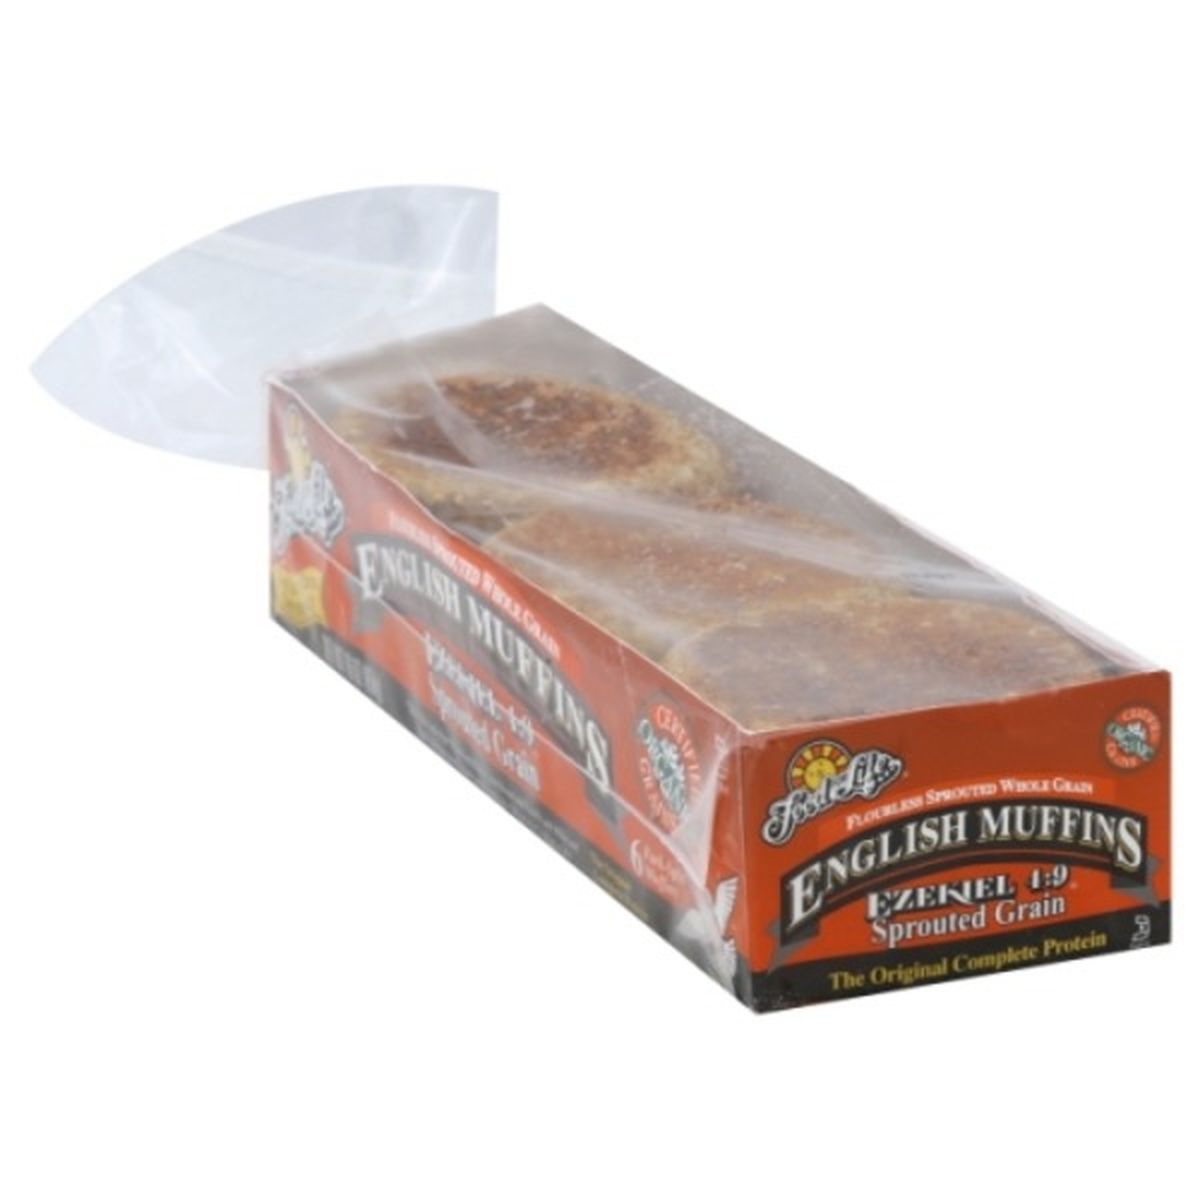 Calories in Food for Life Ezekiel 4:9 English Muffins, Sprouted Grain